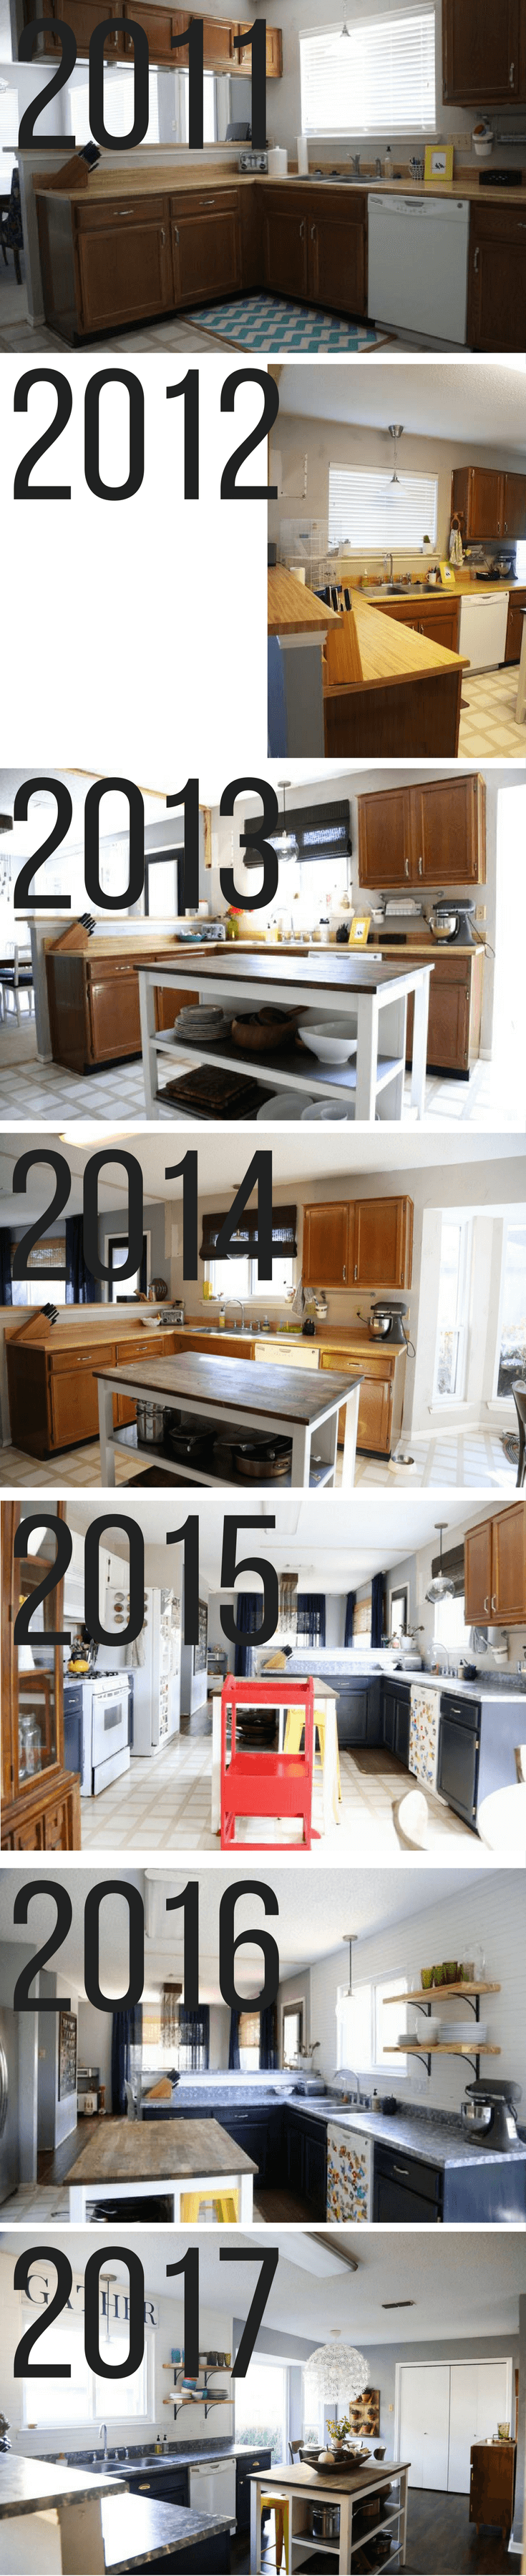 A look at the evolution of a kitchen throughout the years. Ideas for how to decorate a kitchen